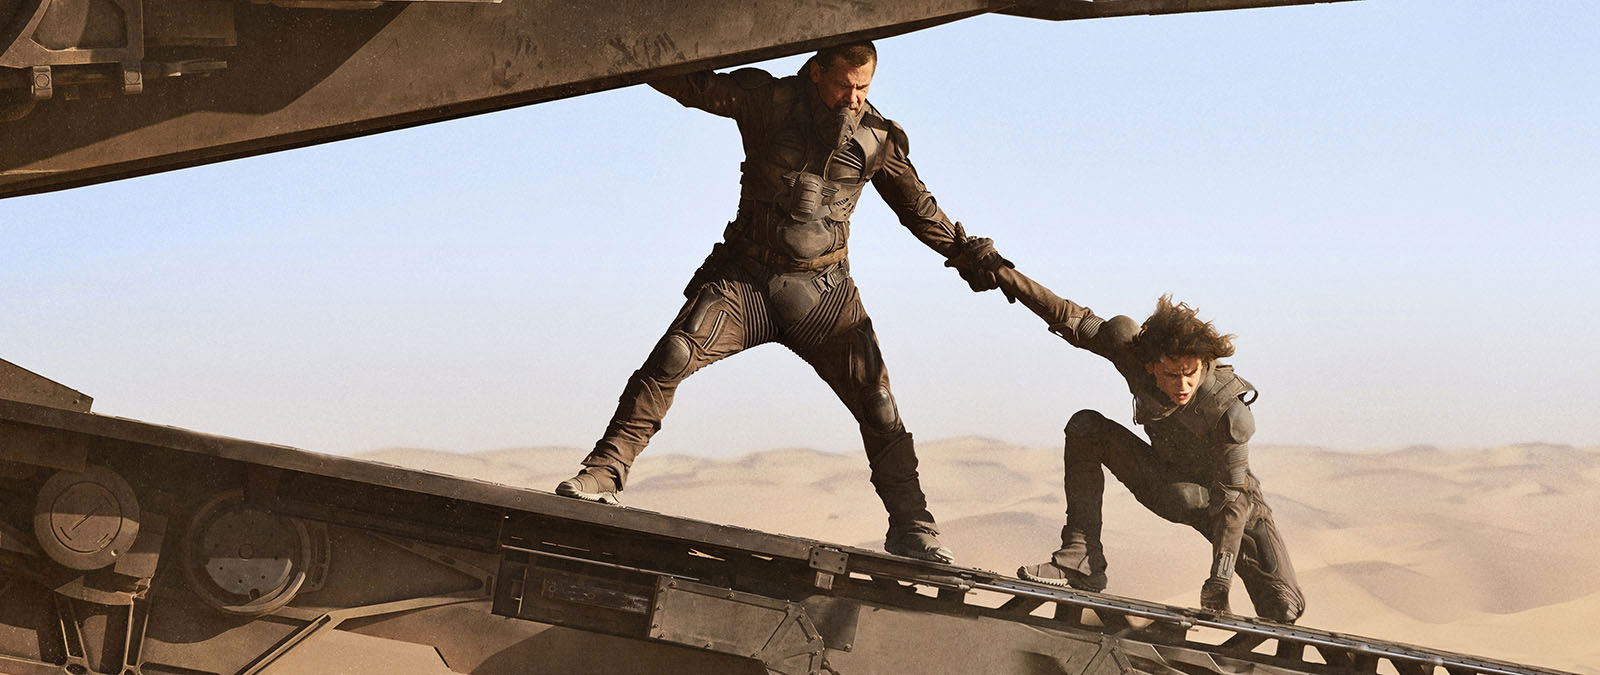 Gurney Halleck (Josh Brolin) and Paul Atreides (Timothée Chalamet) make a last-minute escape from a sandworm, in the spice harvester scene of the 'Dune: Part One' movie.